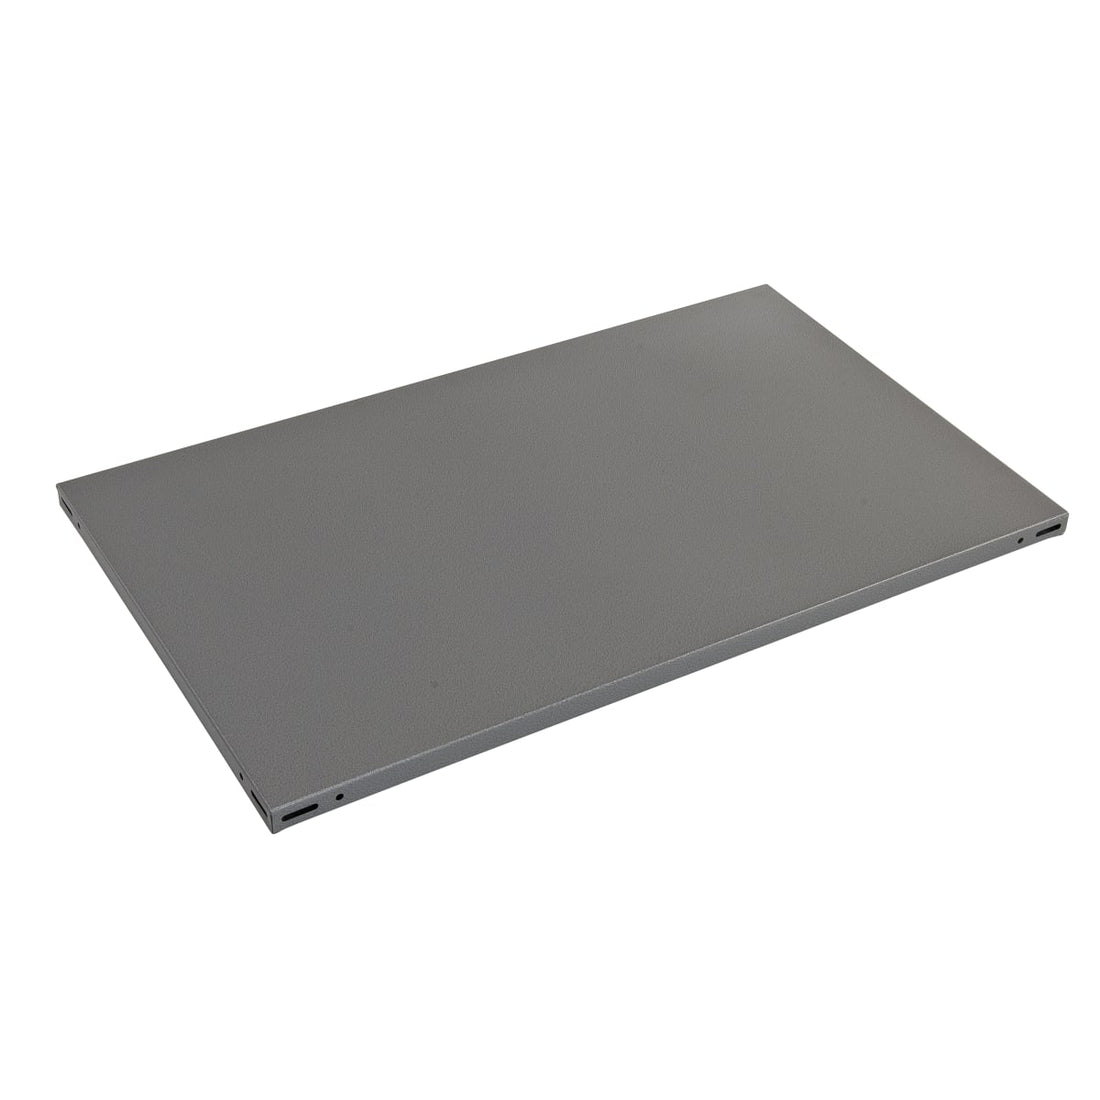 W60xD50 CM 110KG LOADING LOADING METAL SIDED GRAY COLOUR